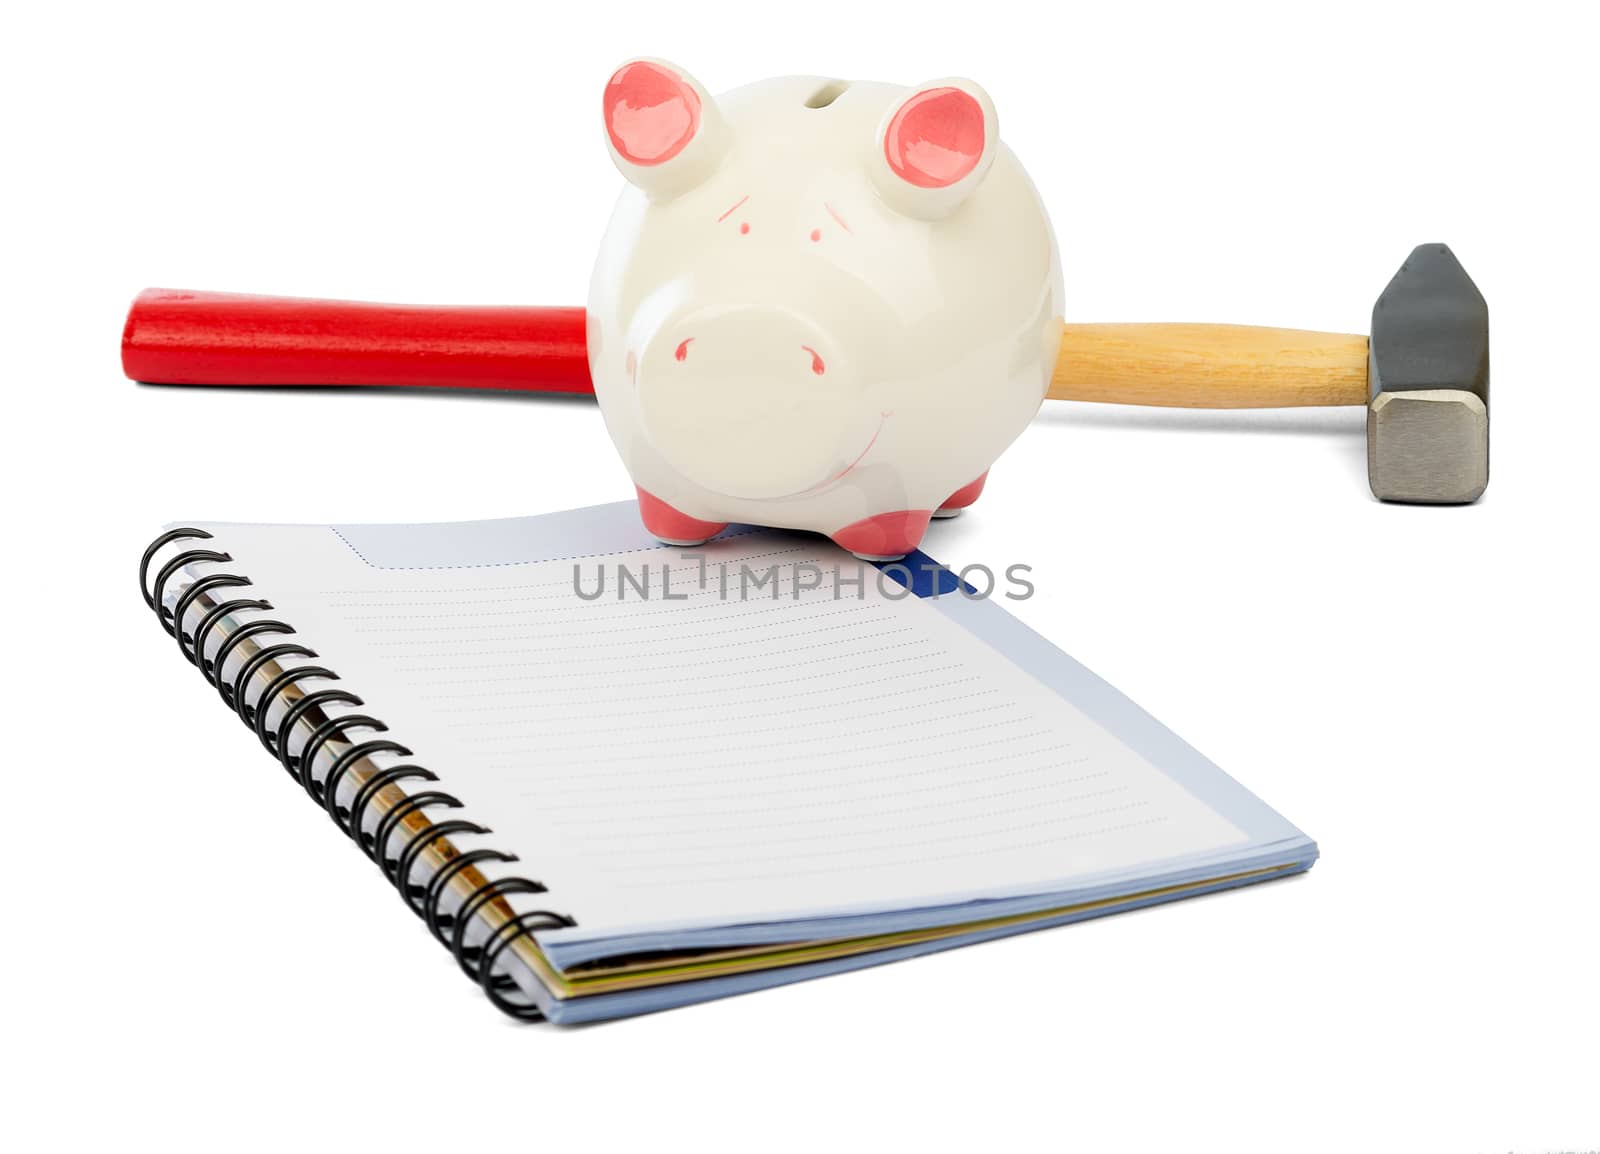 Piggy bank with hammer and pad on isolated white background